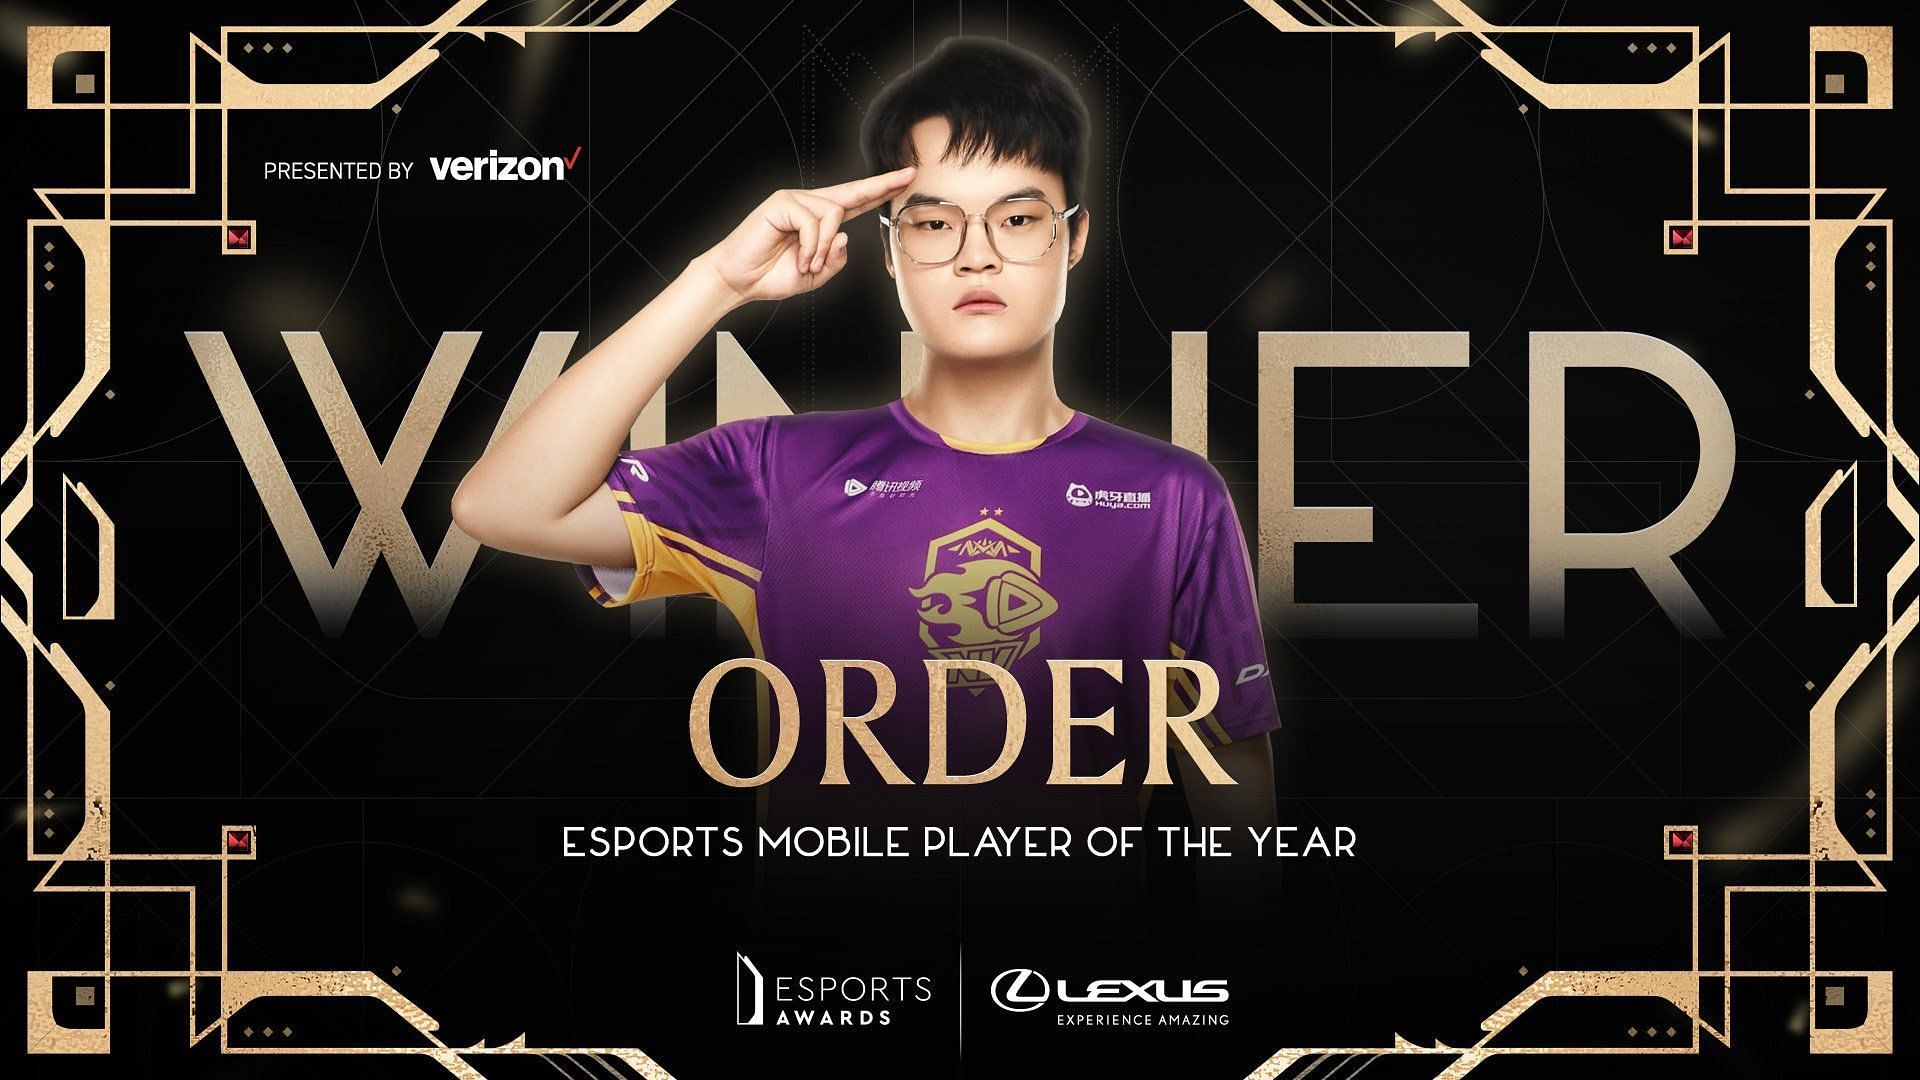 PUBG Mobile star Order wins Esports Mobile Player of the Year at Esports Awards 2022